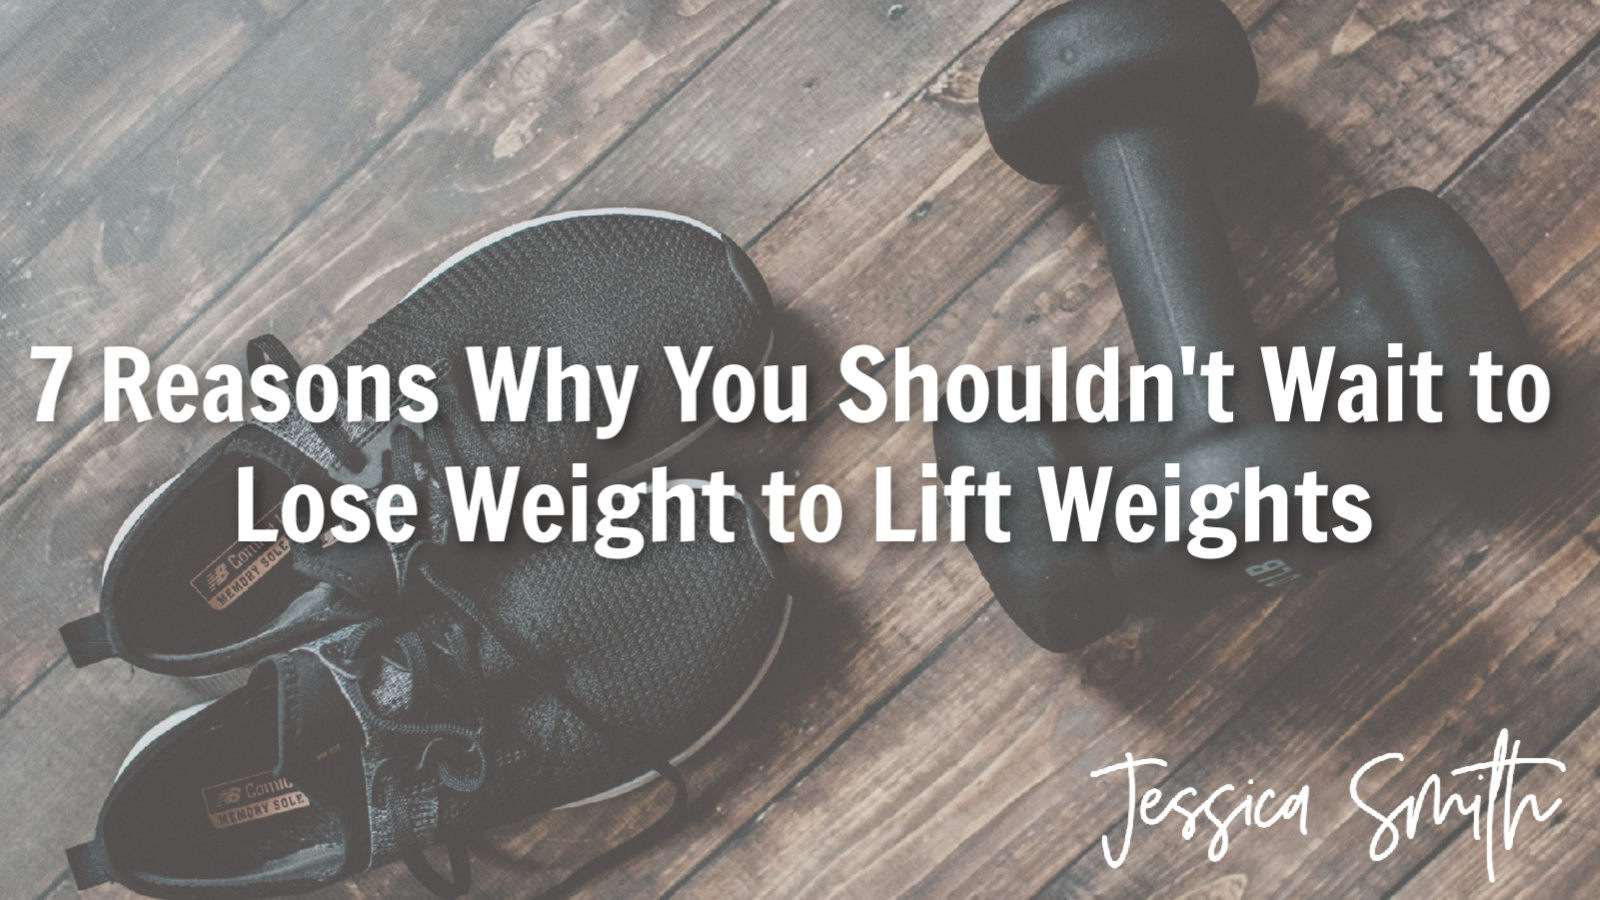 7 Reasons You Shouldn’t Wait to Lift Weights to Lose Weight